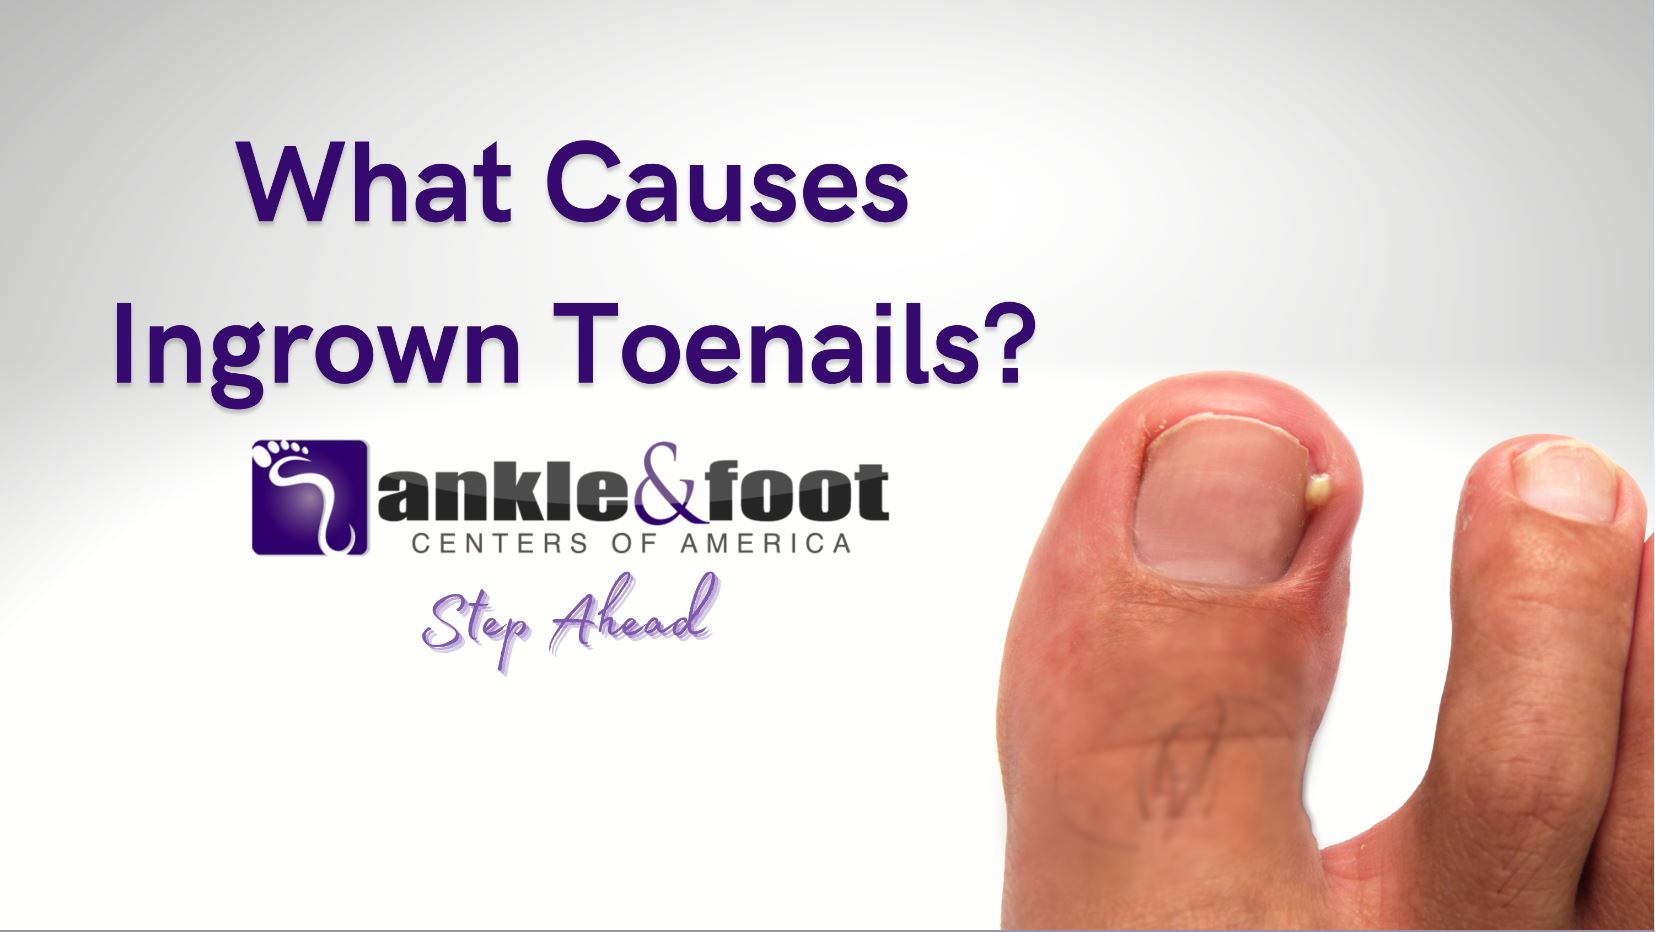 Second toe pain: Causes and how to get relief